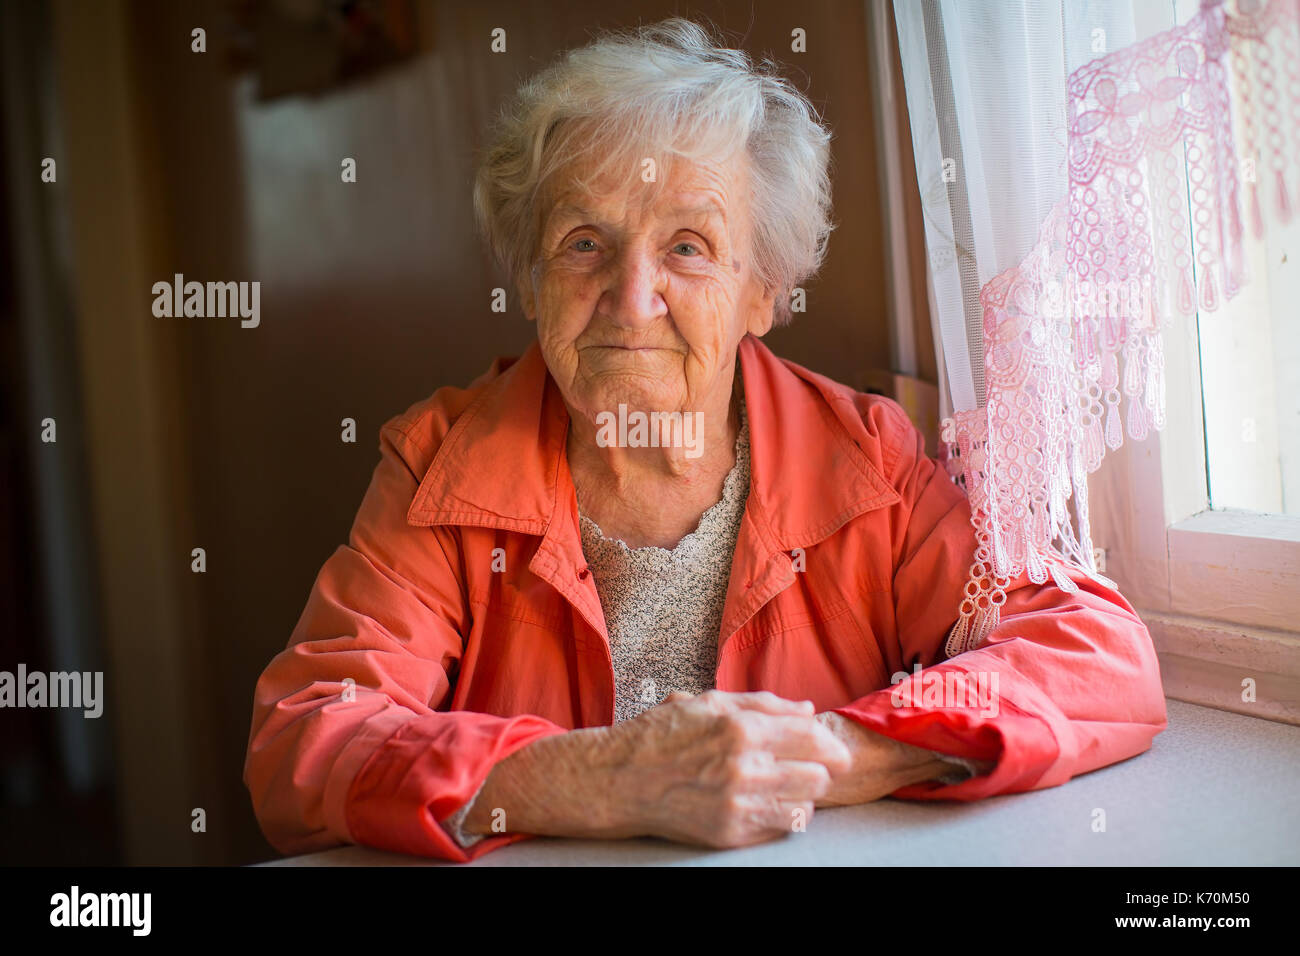 Elderly woman in red jacket sitting at table portrait. Stock Photo